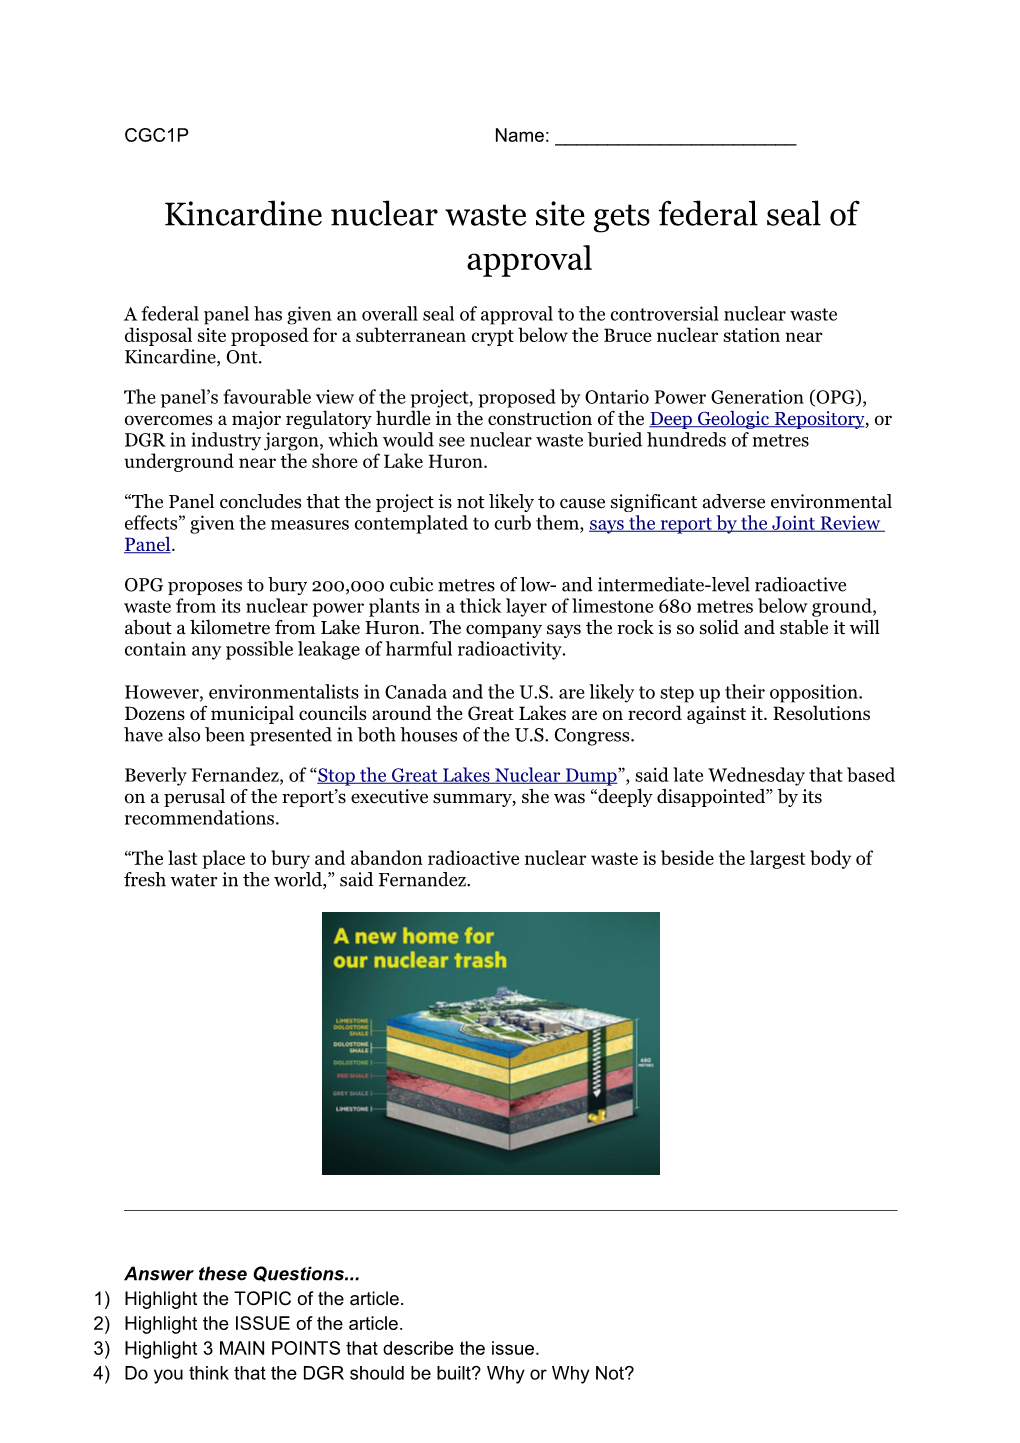 Kincardine Nuclear Waste Site Gets Federal Seal of Approval